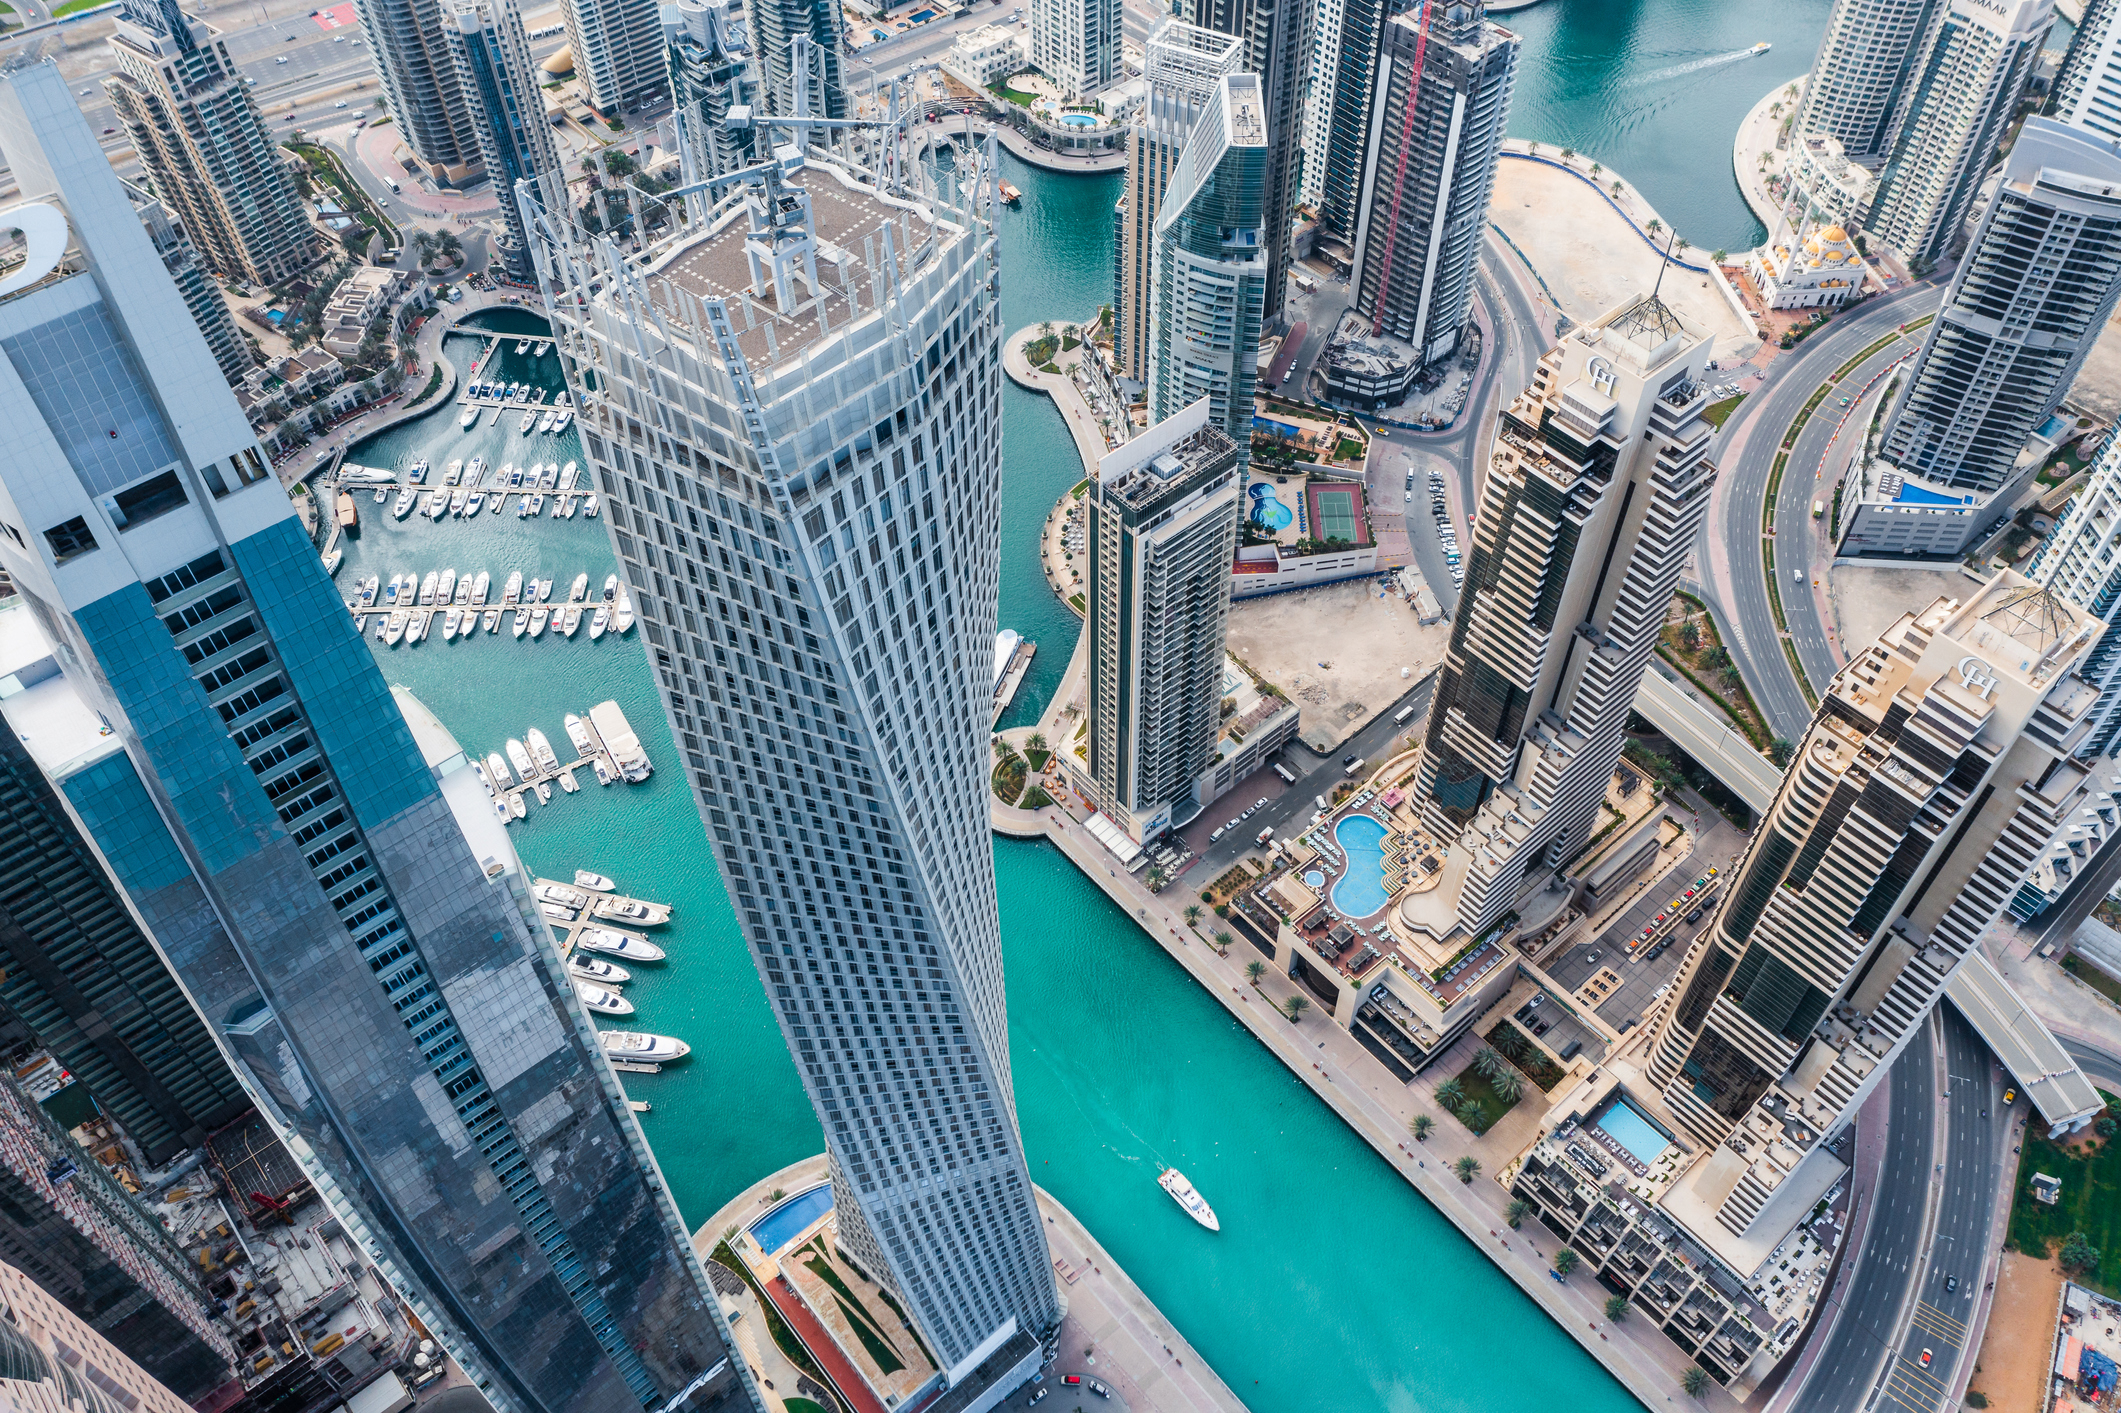 Aerial view of Dubai Marina futuristic skyline with a man-made lake in the middle